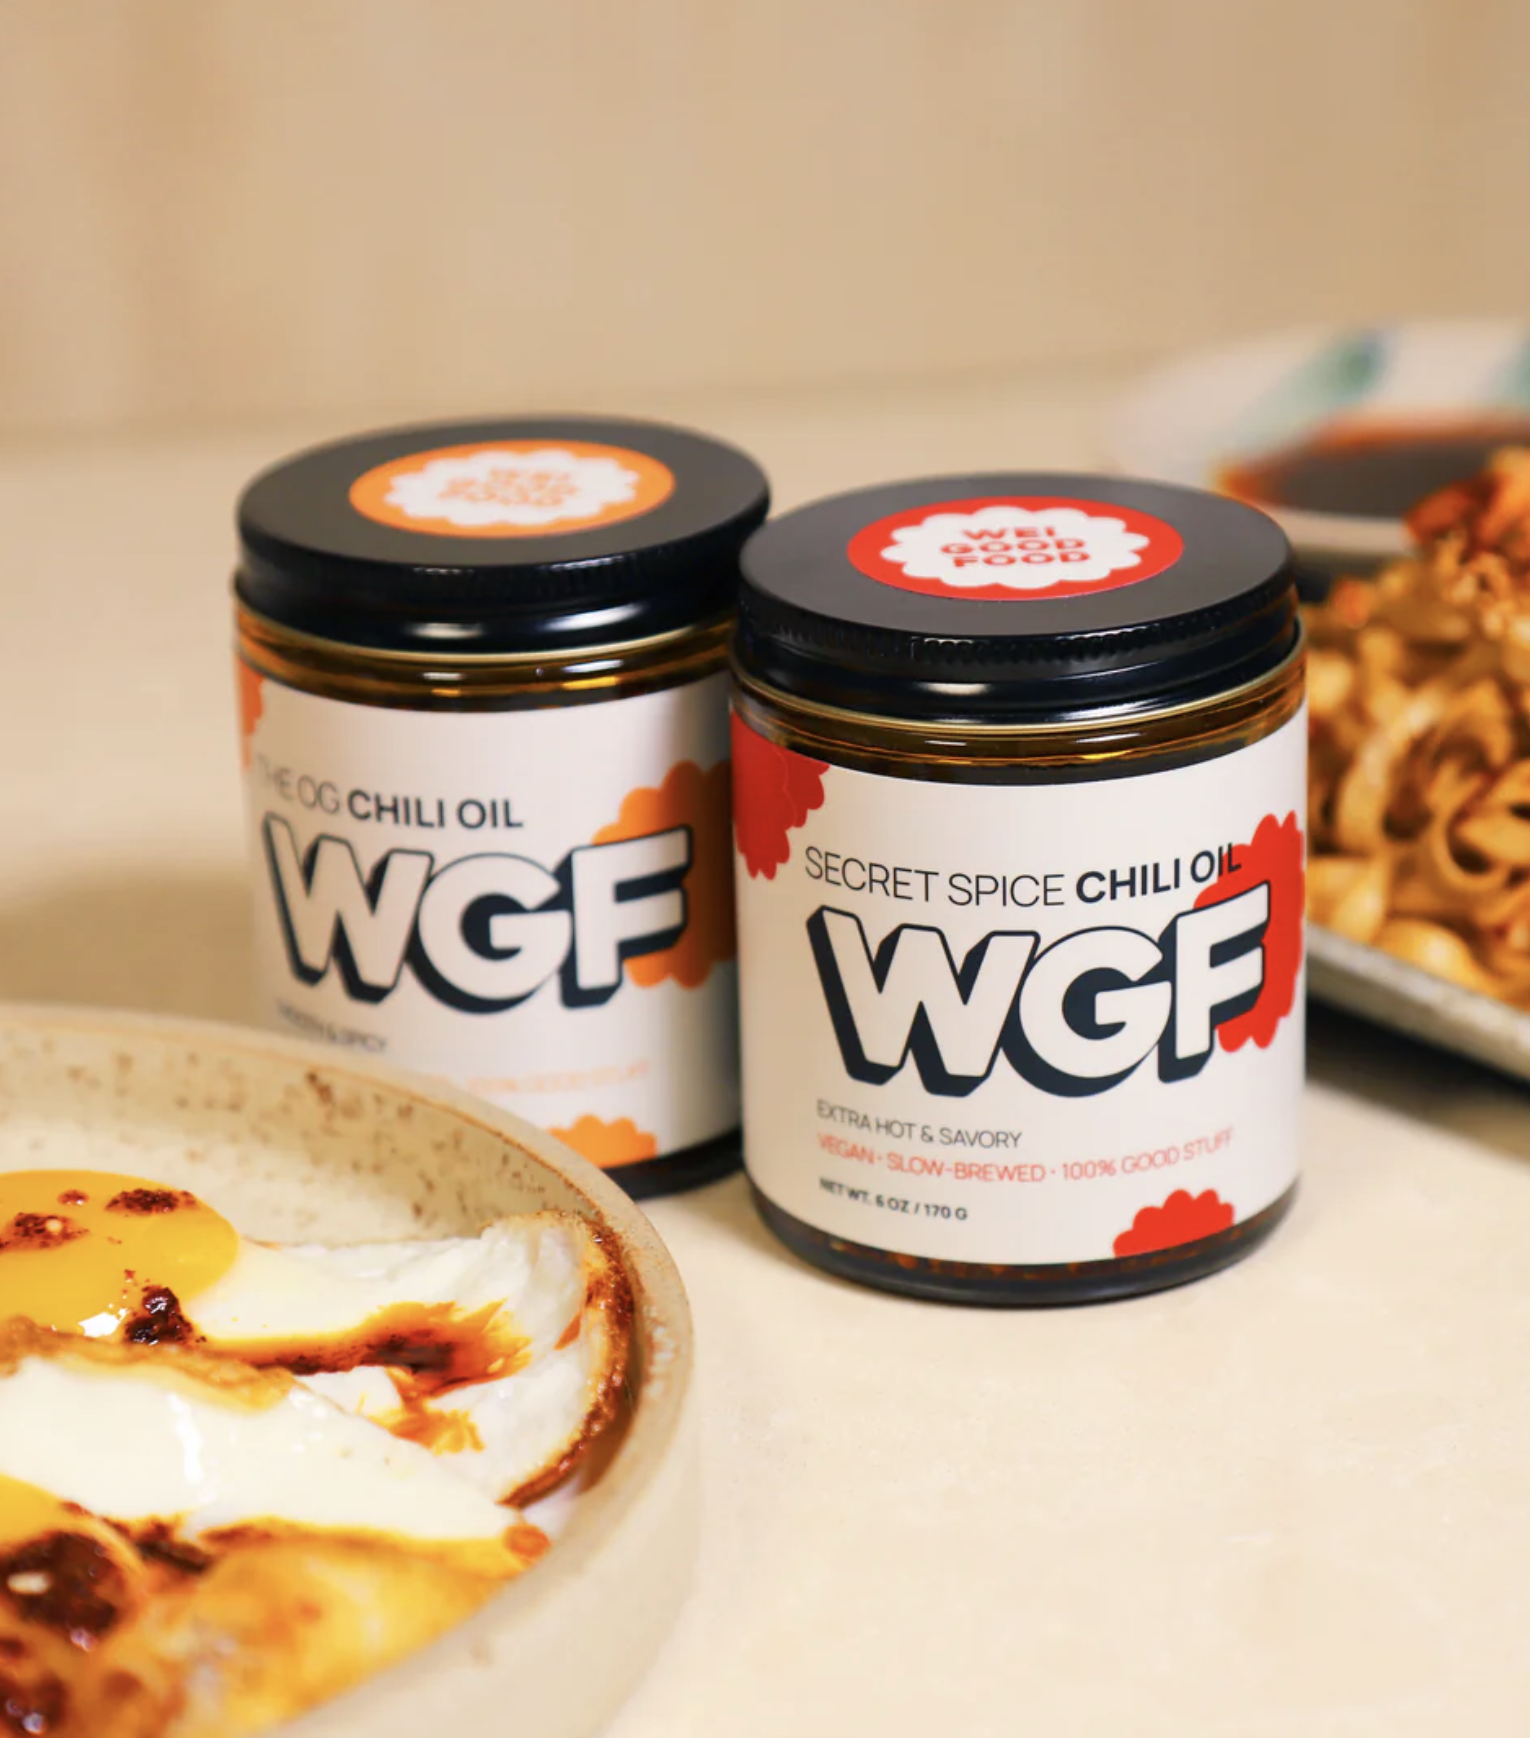 Two jars of WGF Secret Spice Chili Oil next to a bowl of prepared food